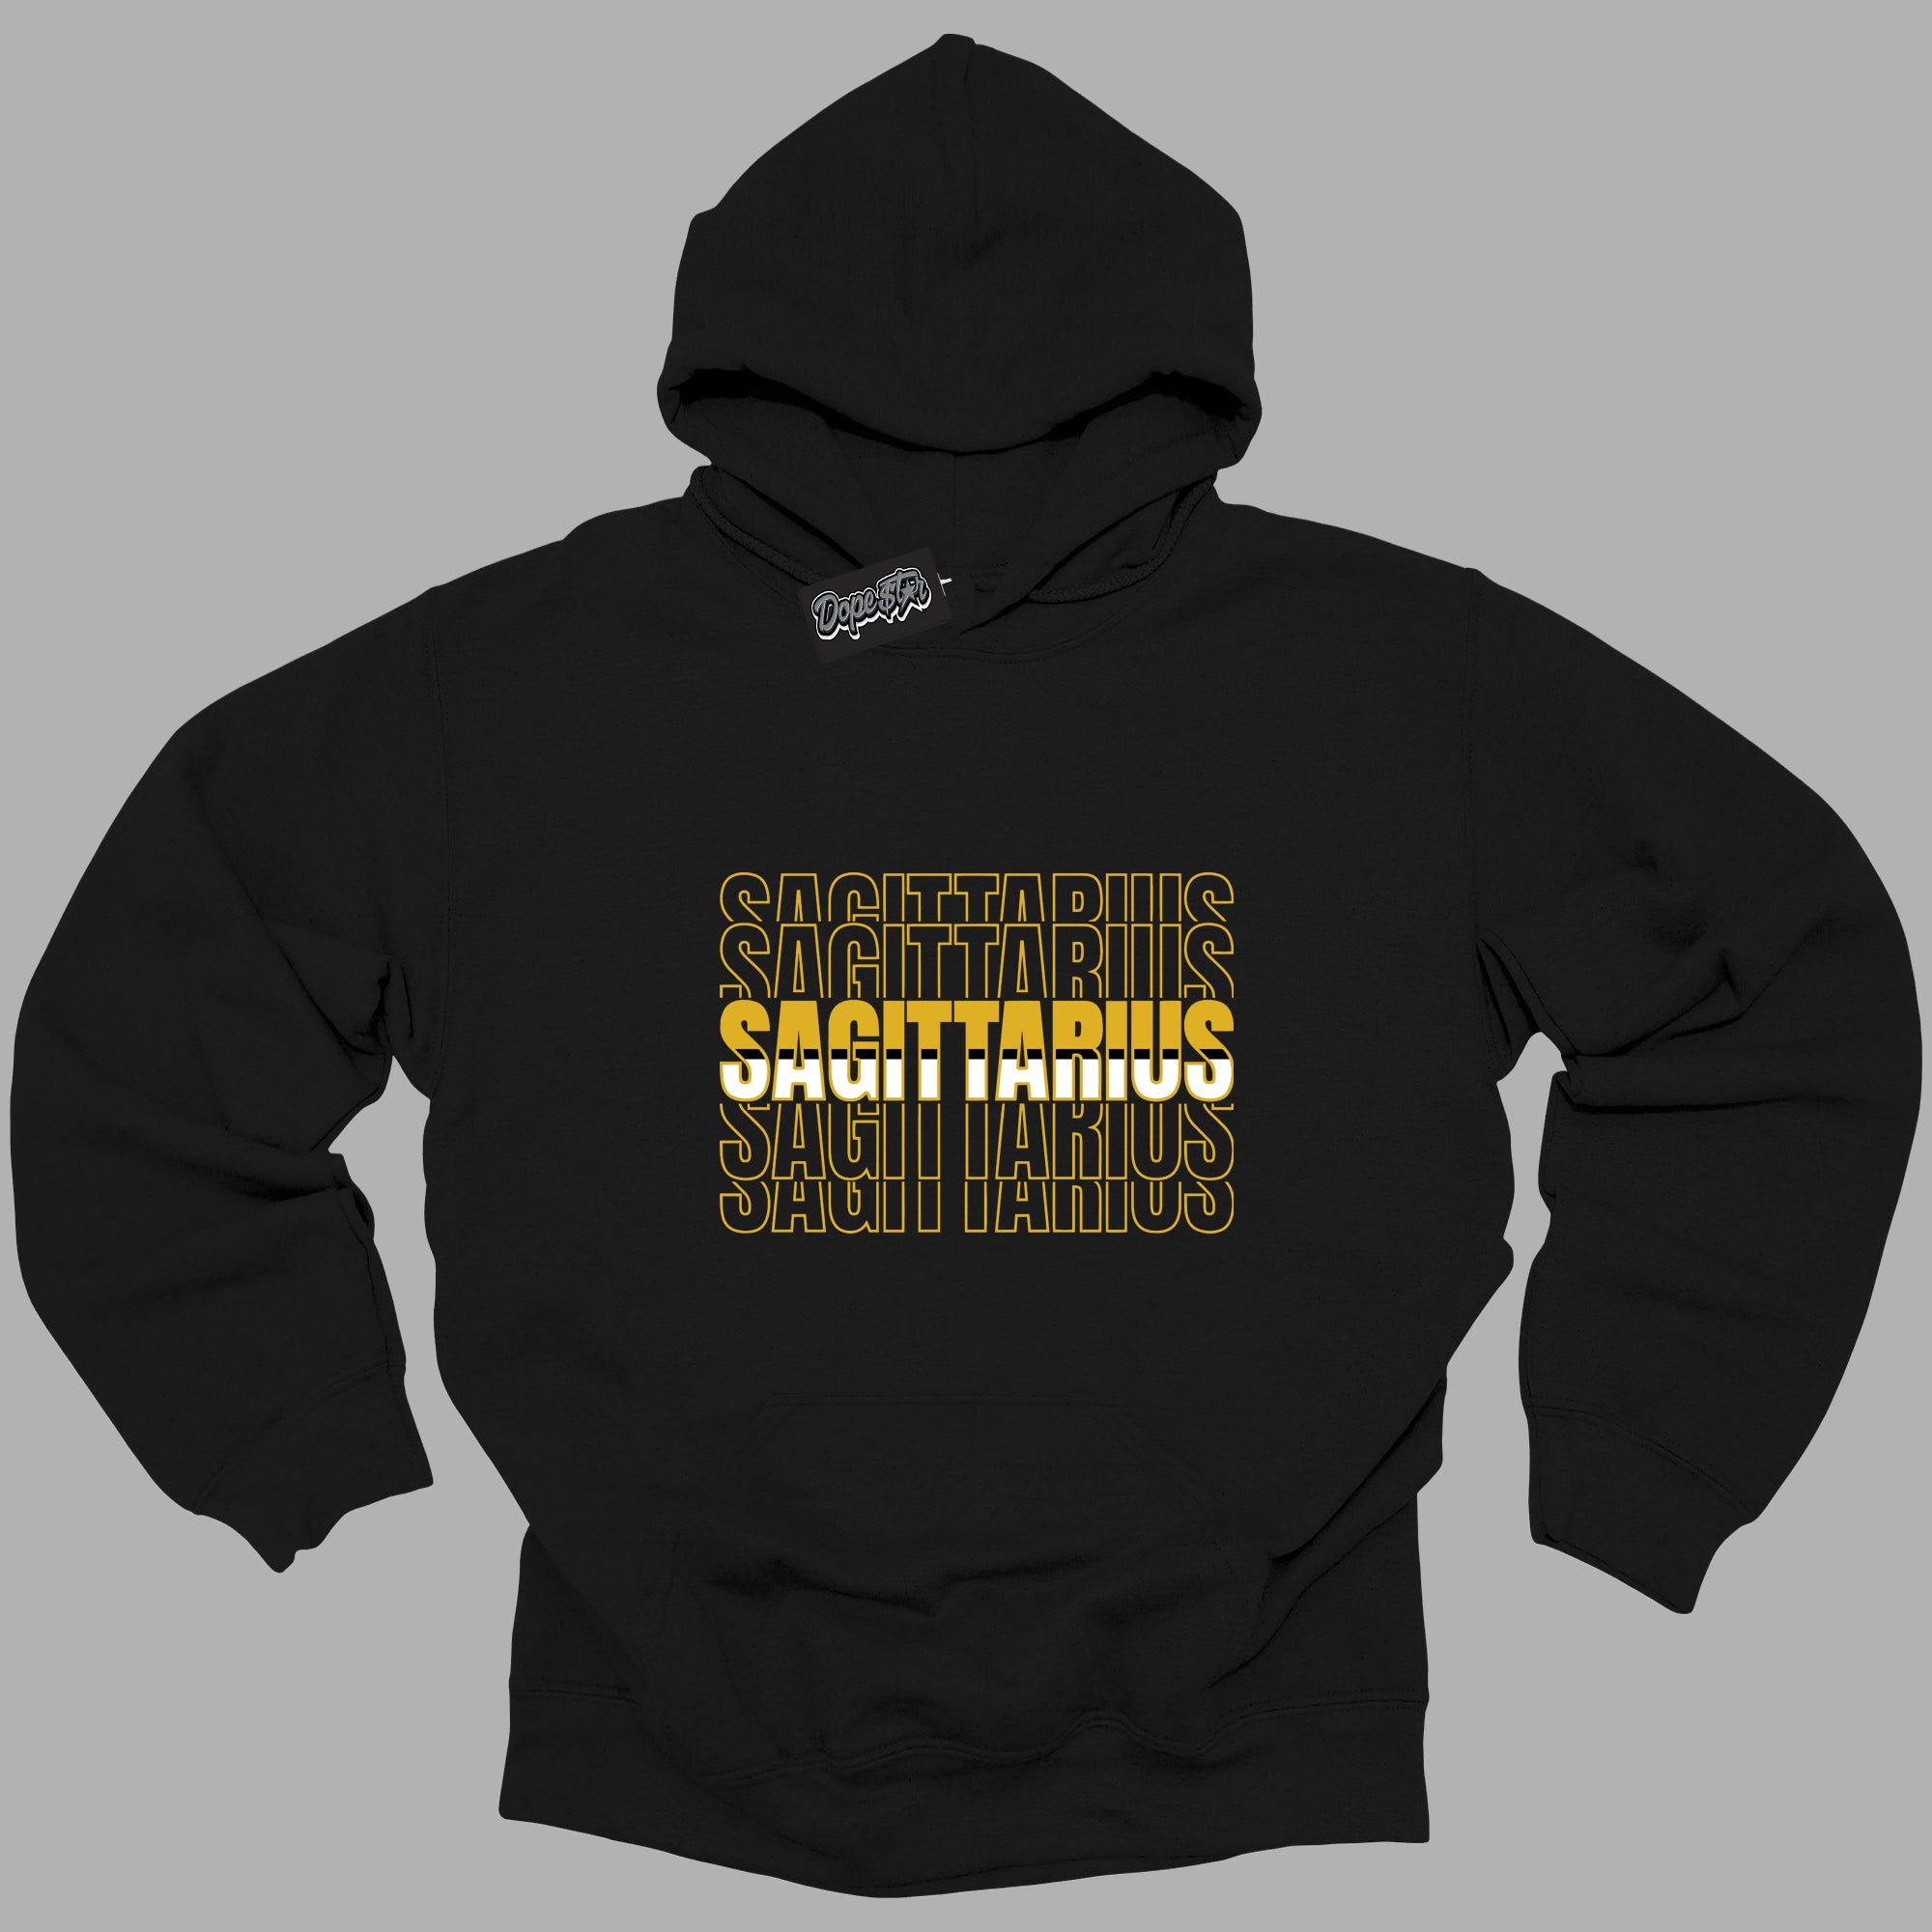 Cool Black Hoodie with “ Sagittarius ”  design that Perfectly Matches Yellow Ochre 6s Sneakers.